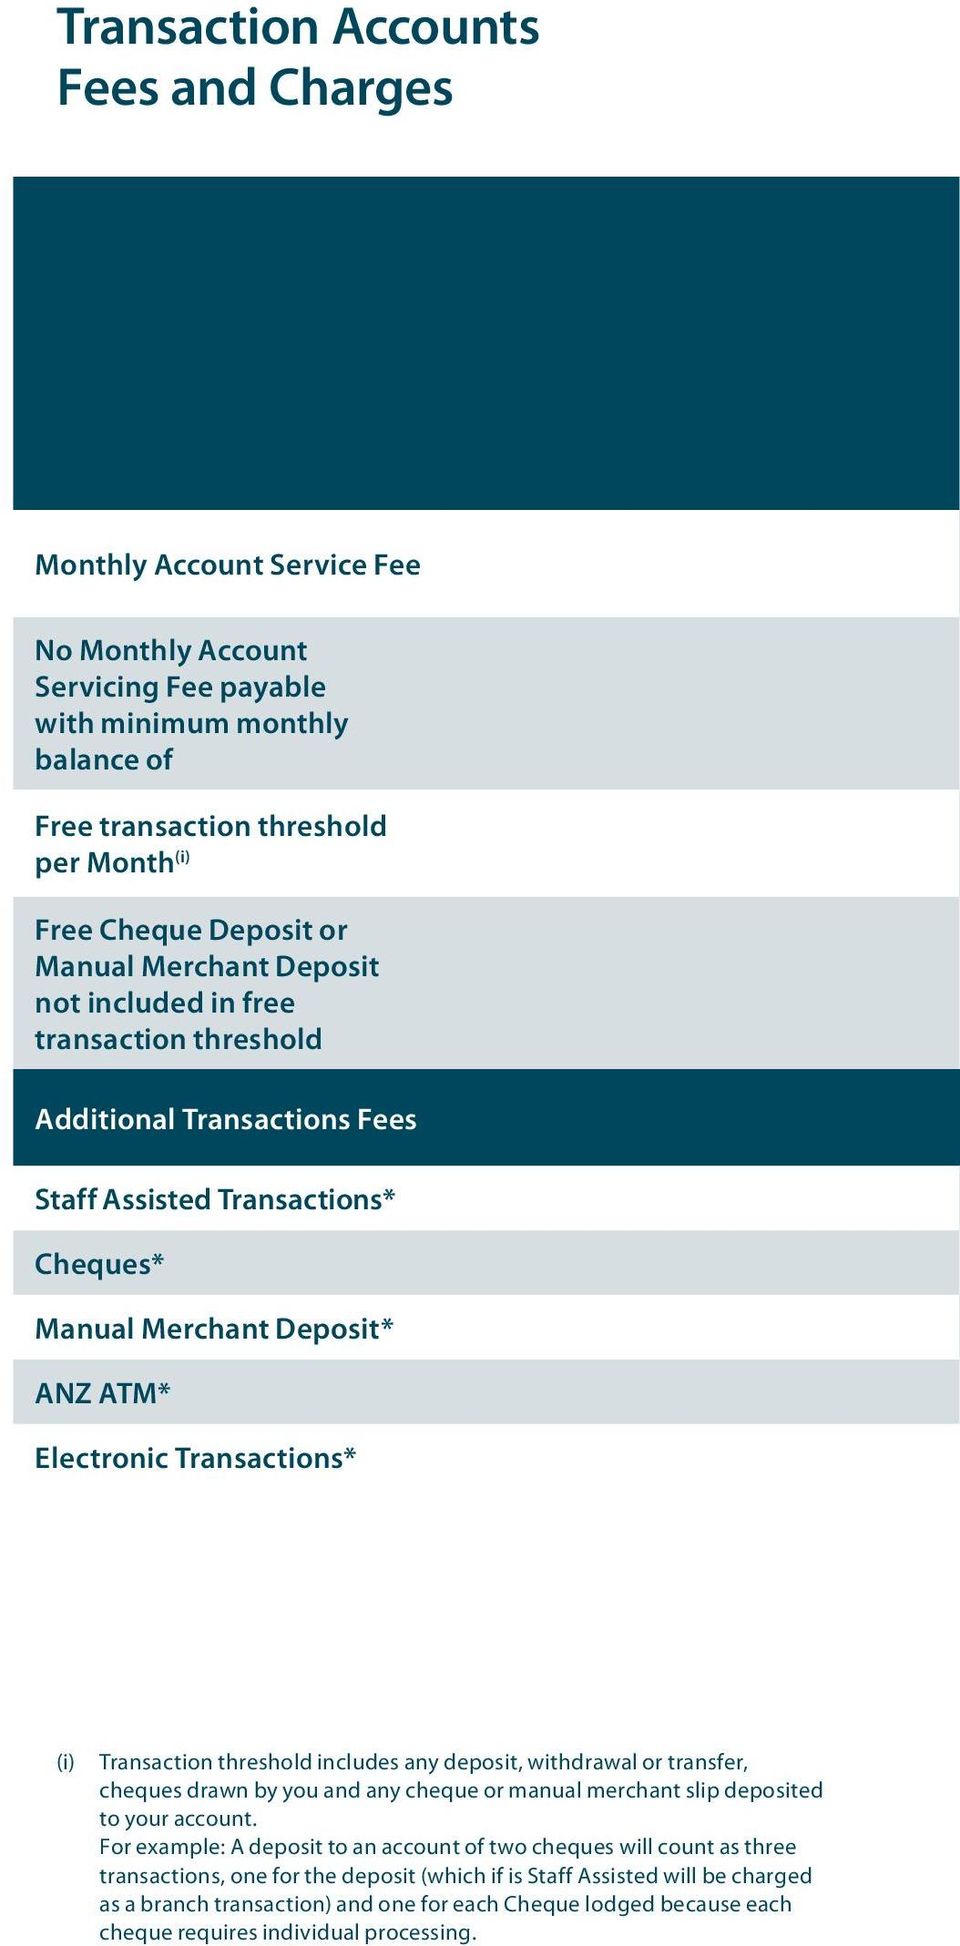 Transaction threshold includes any deposit, withdrawal or transfer, cheques drawn by you and any cheque or manual merchant slip deposited to your account.